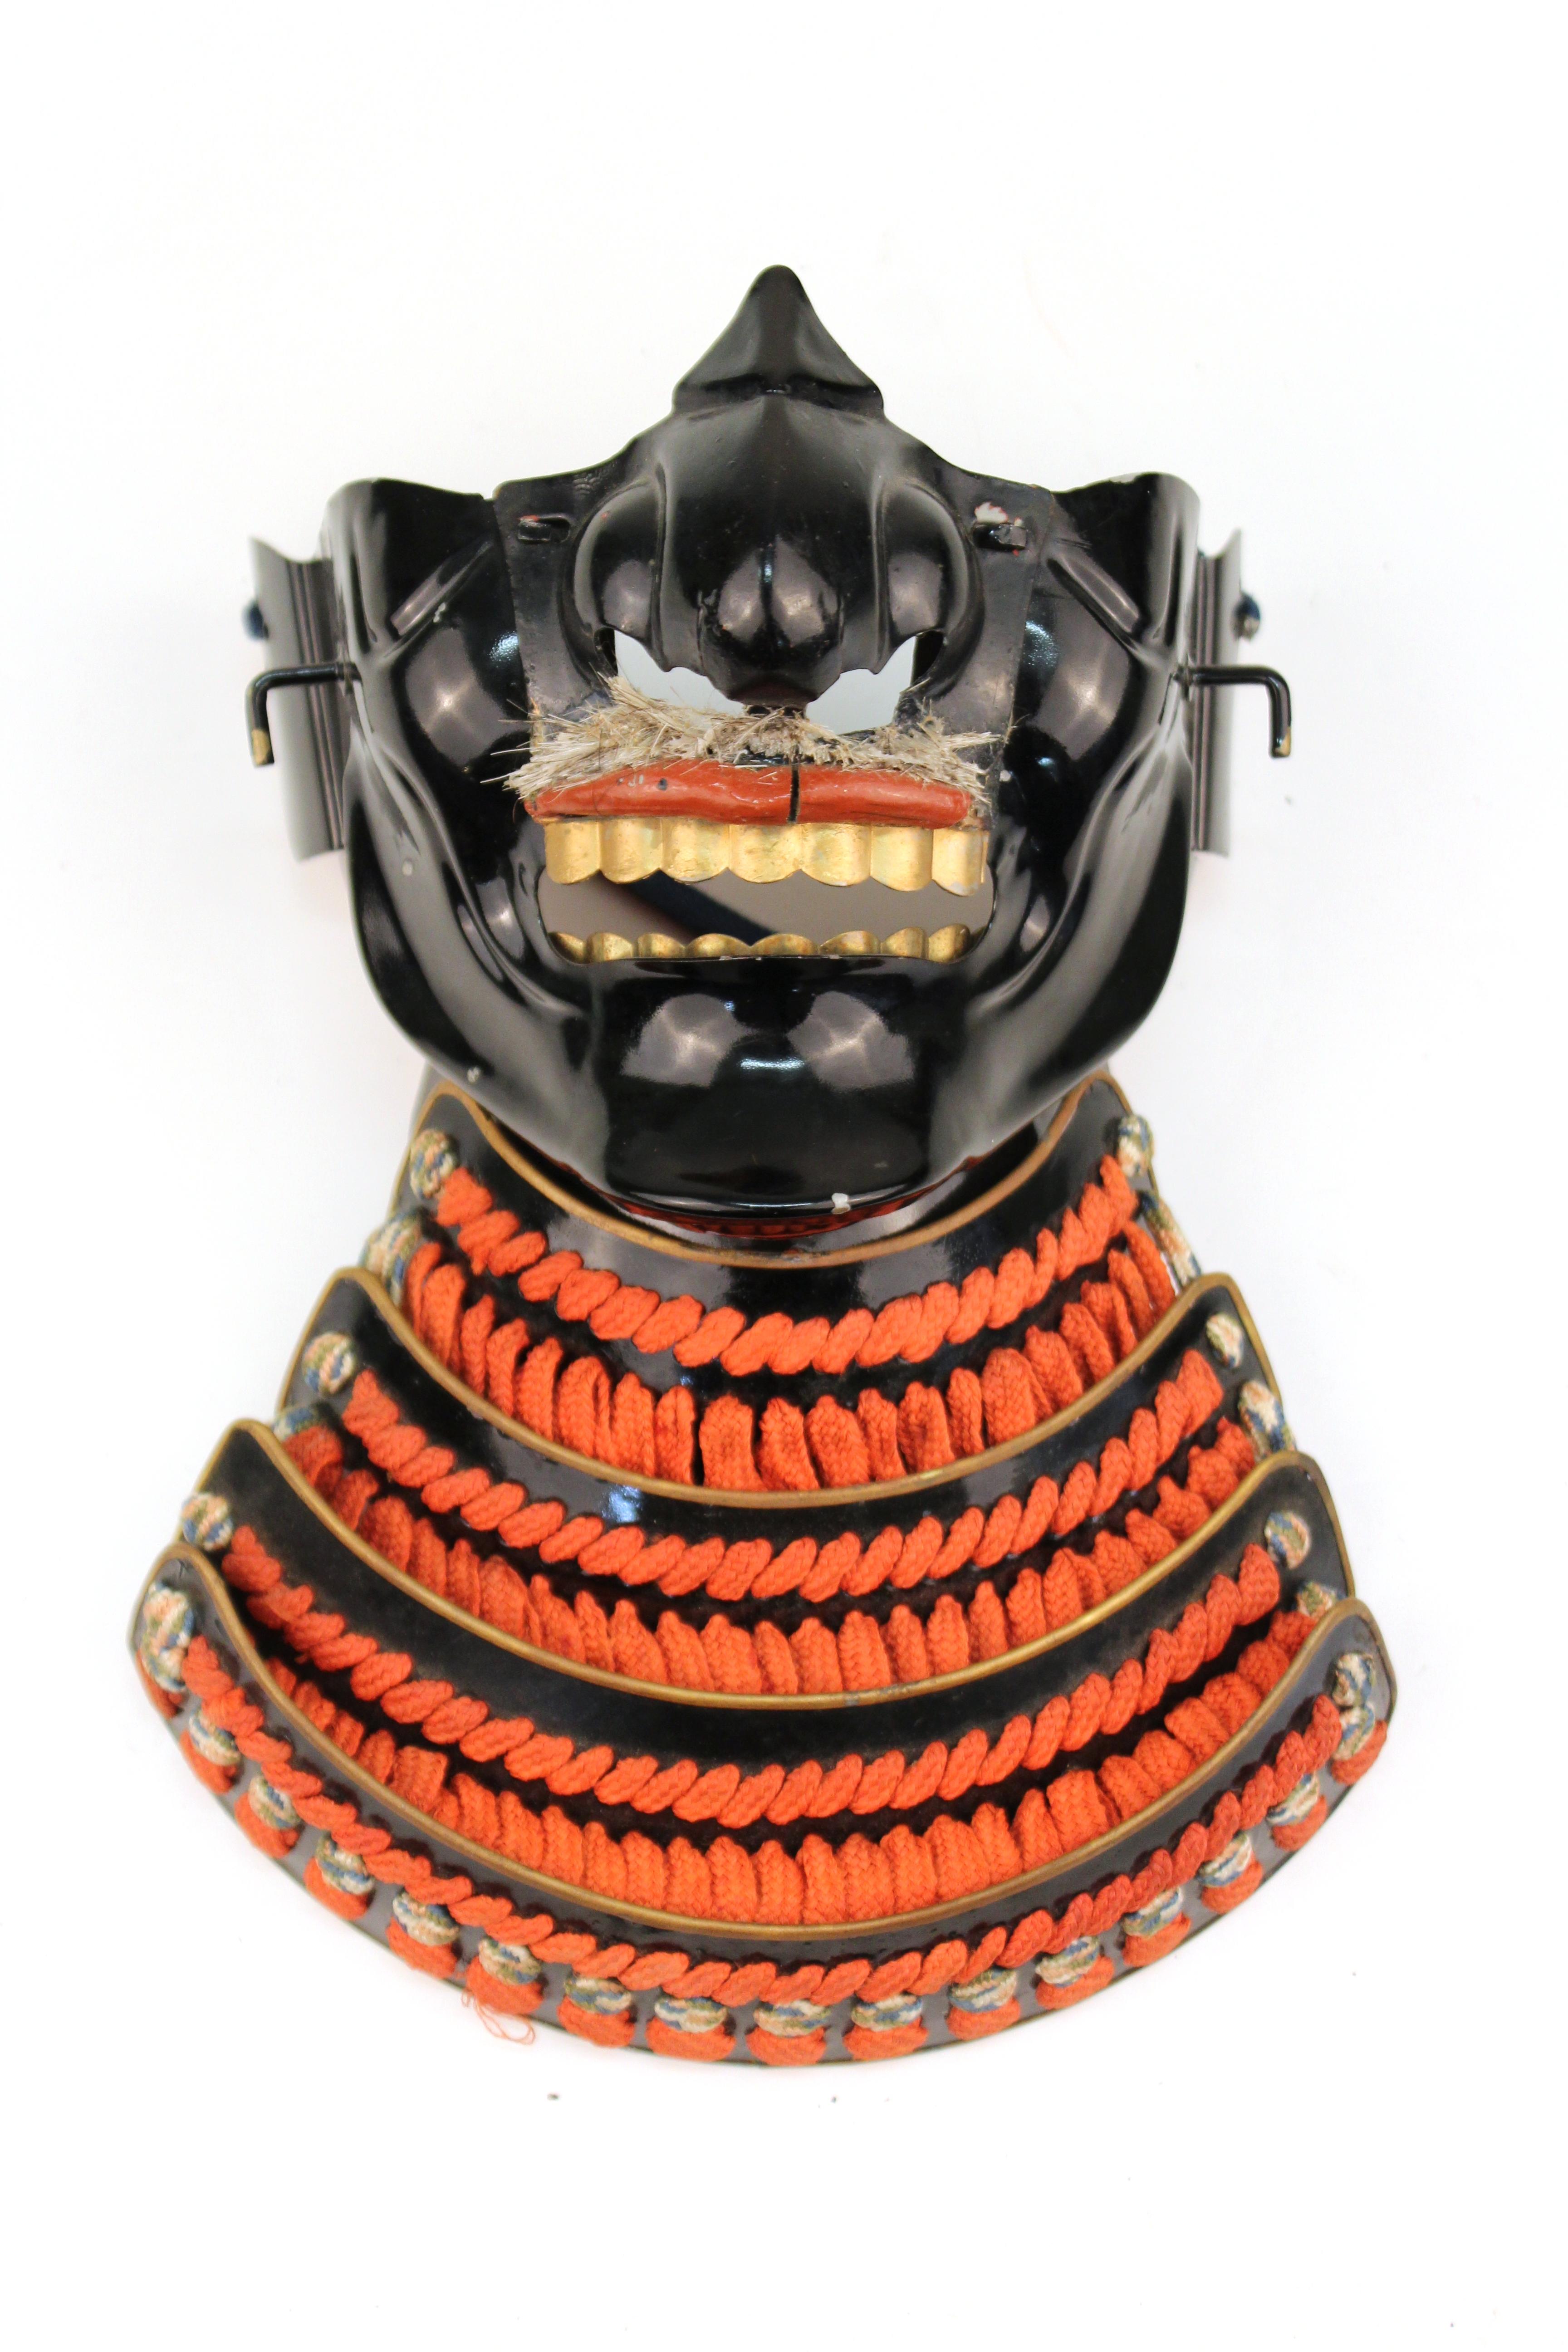 Japanese Meiji period samurai half-face mask with mustache, made in circa 1900 in Japan. In good vintage condition with age-appropriate wear and patina.
 